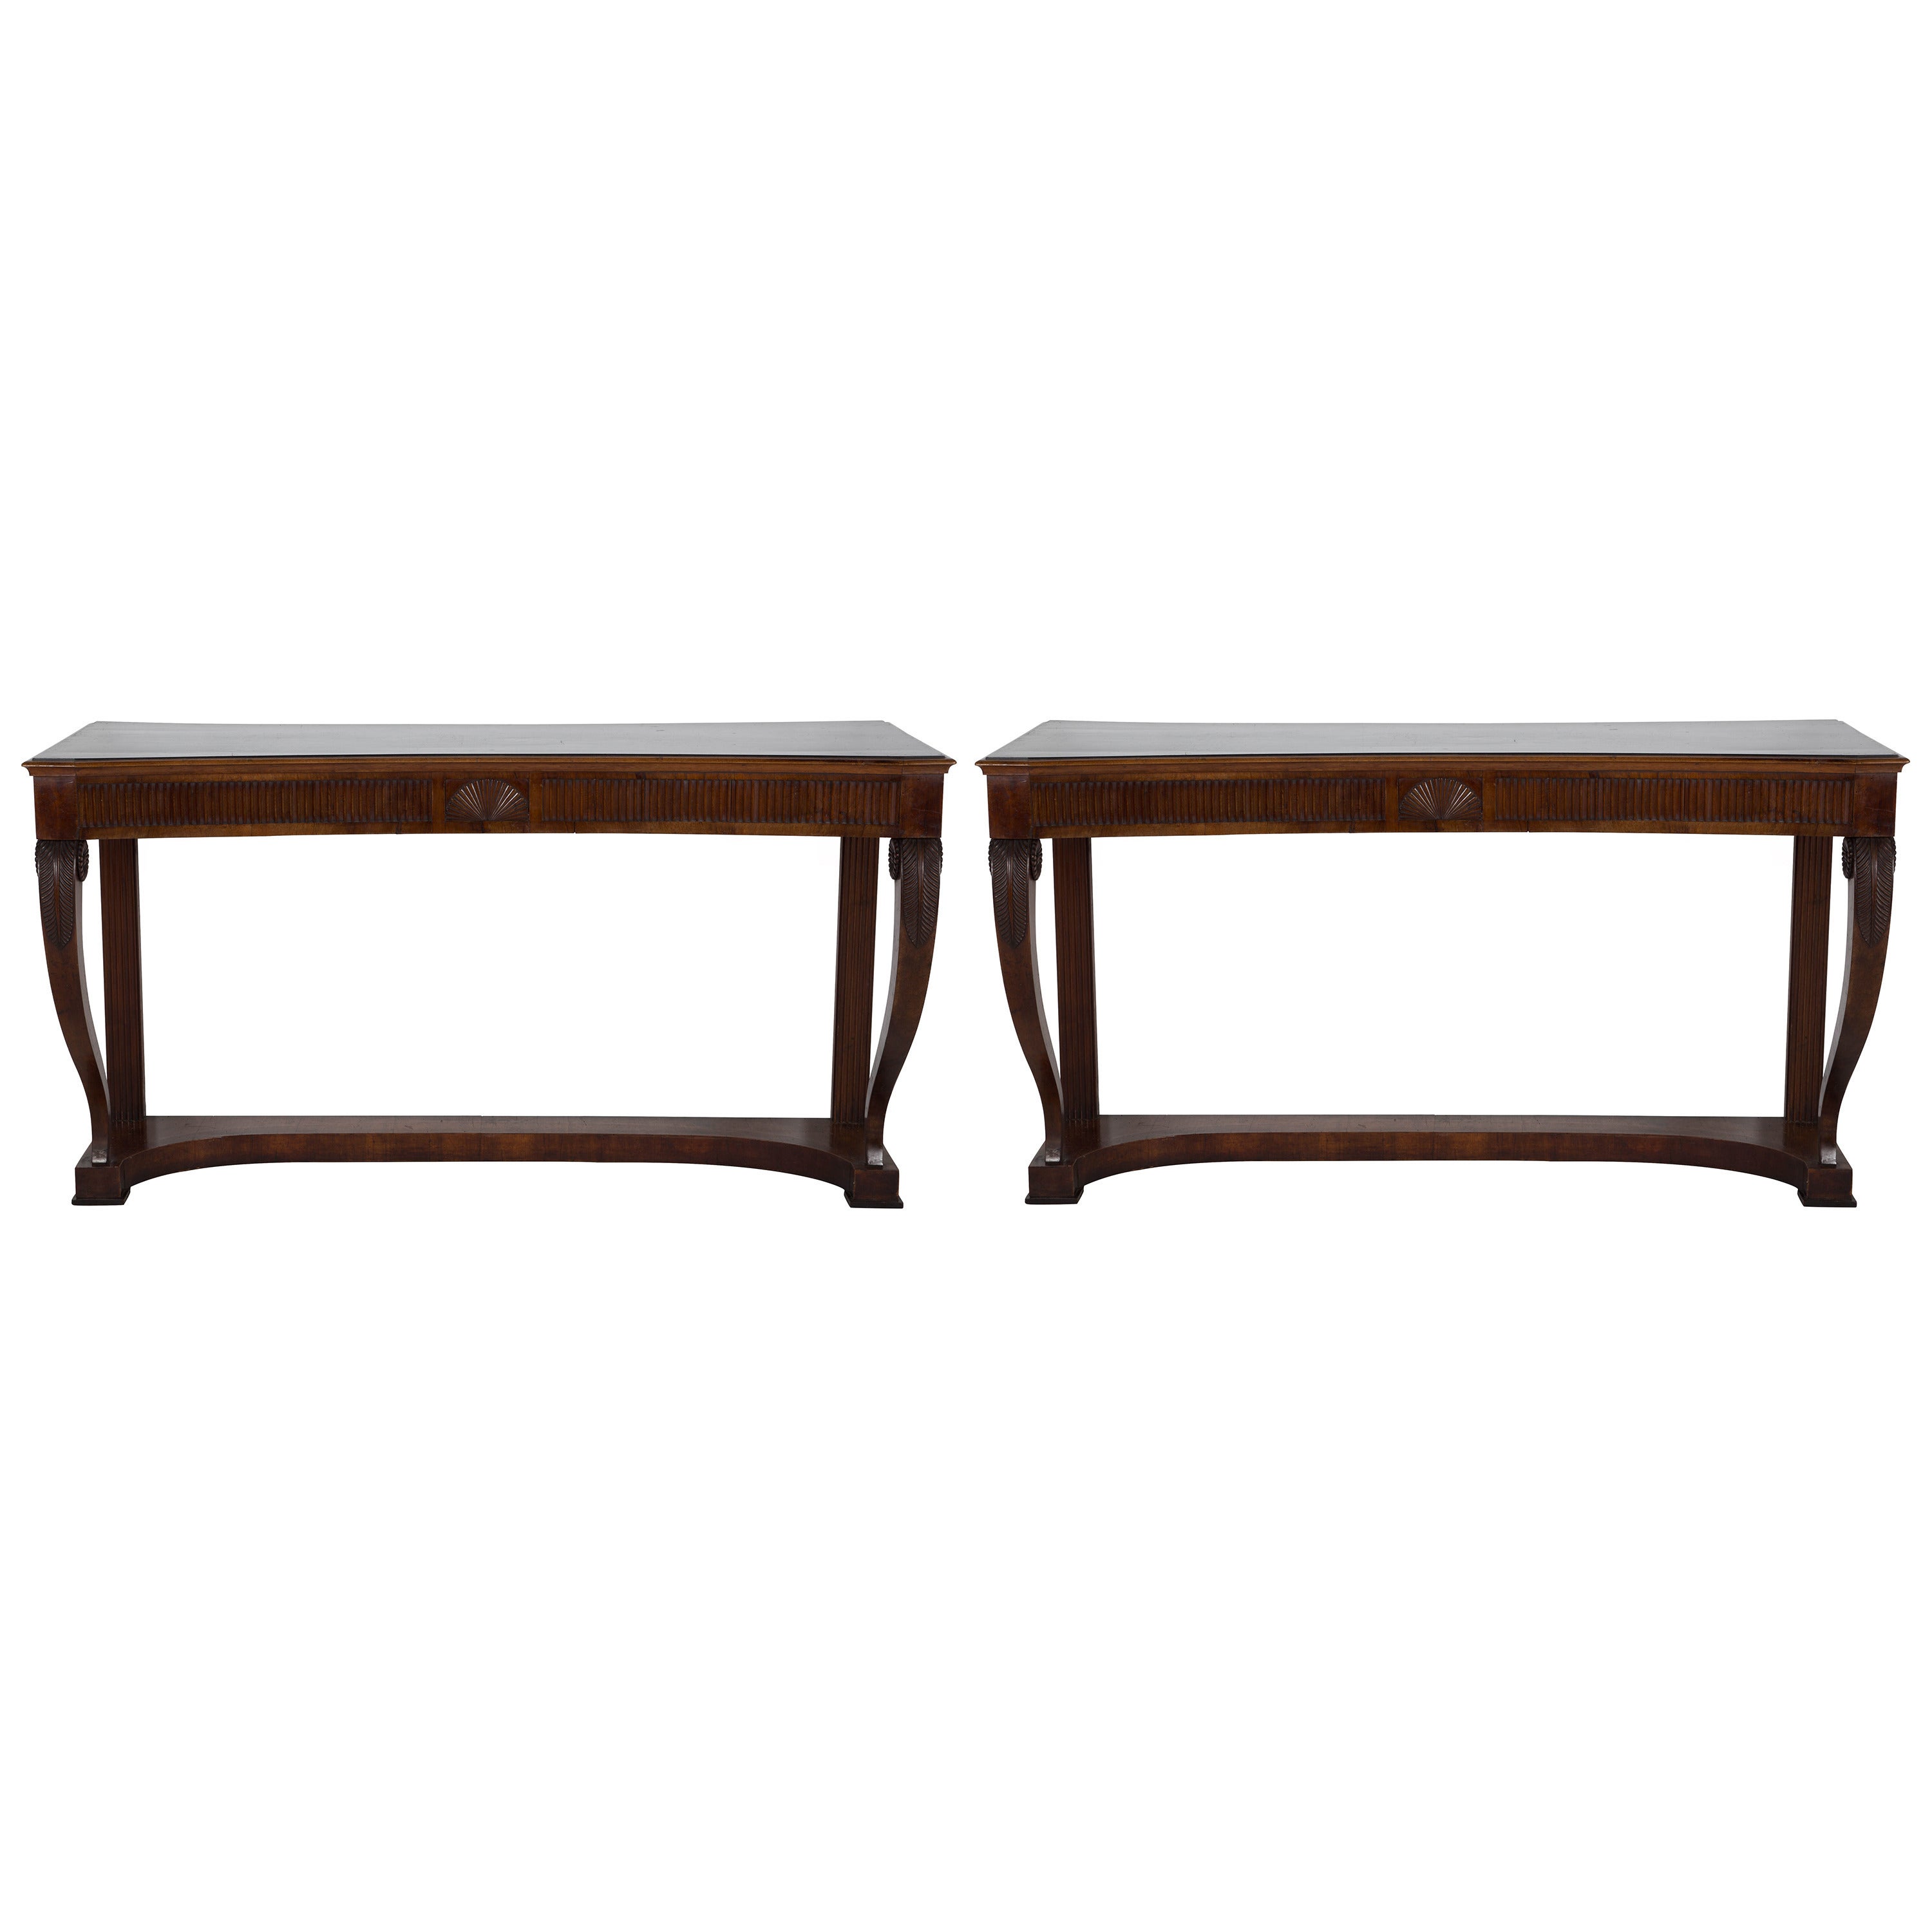 Rare Pair of Walnut Console Tables